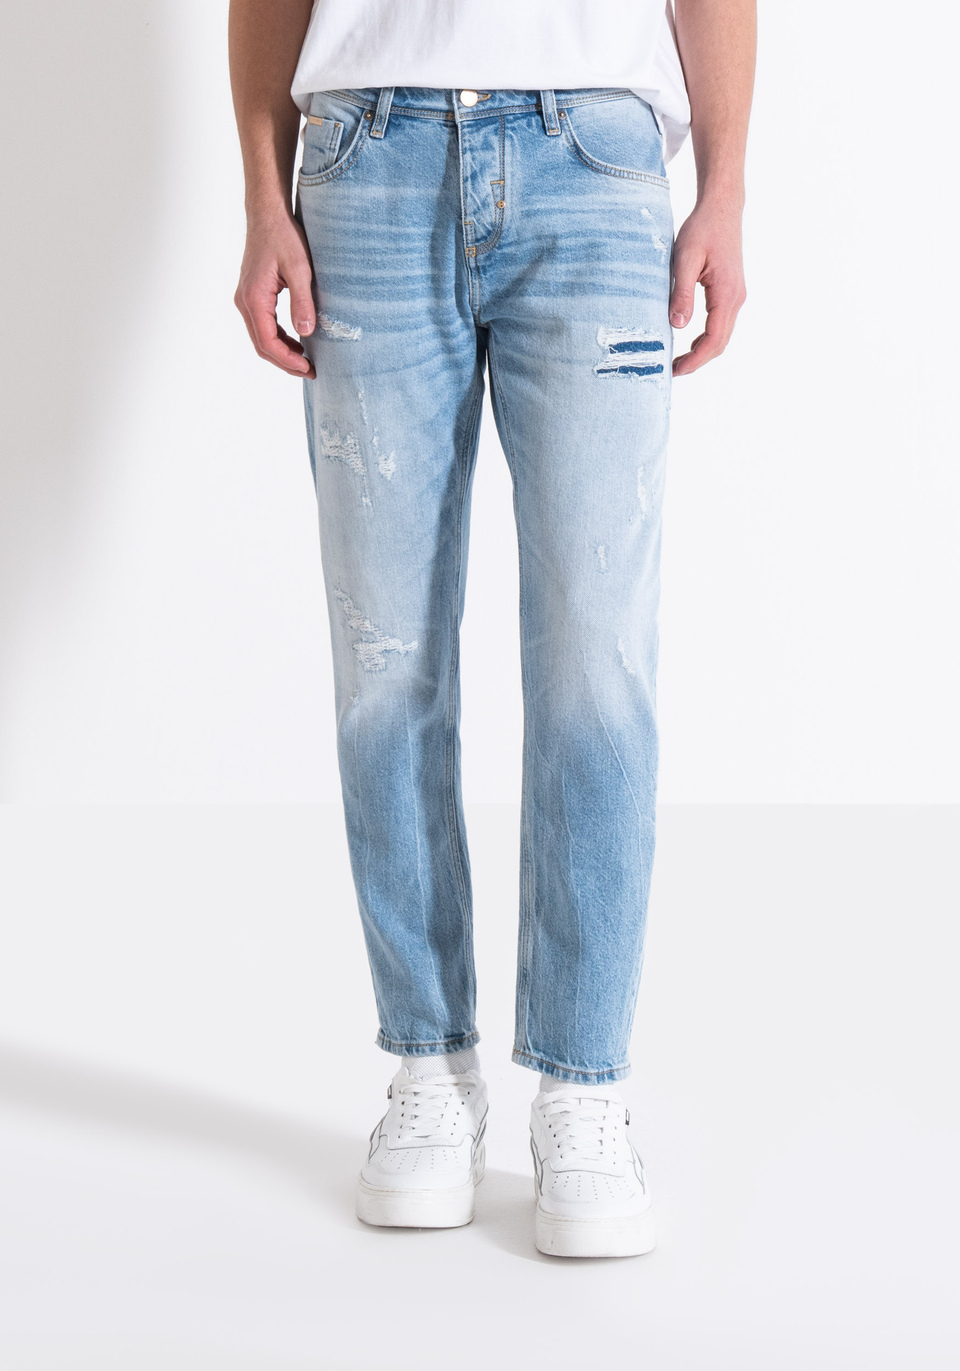 ARGON SLIM ANKLE LENGTH FIT JEANS IN BLUE COMFORT DENIM WITH